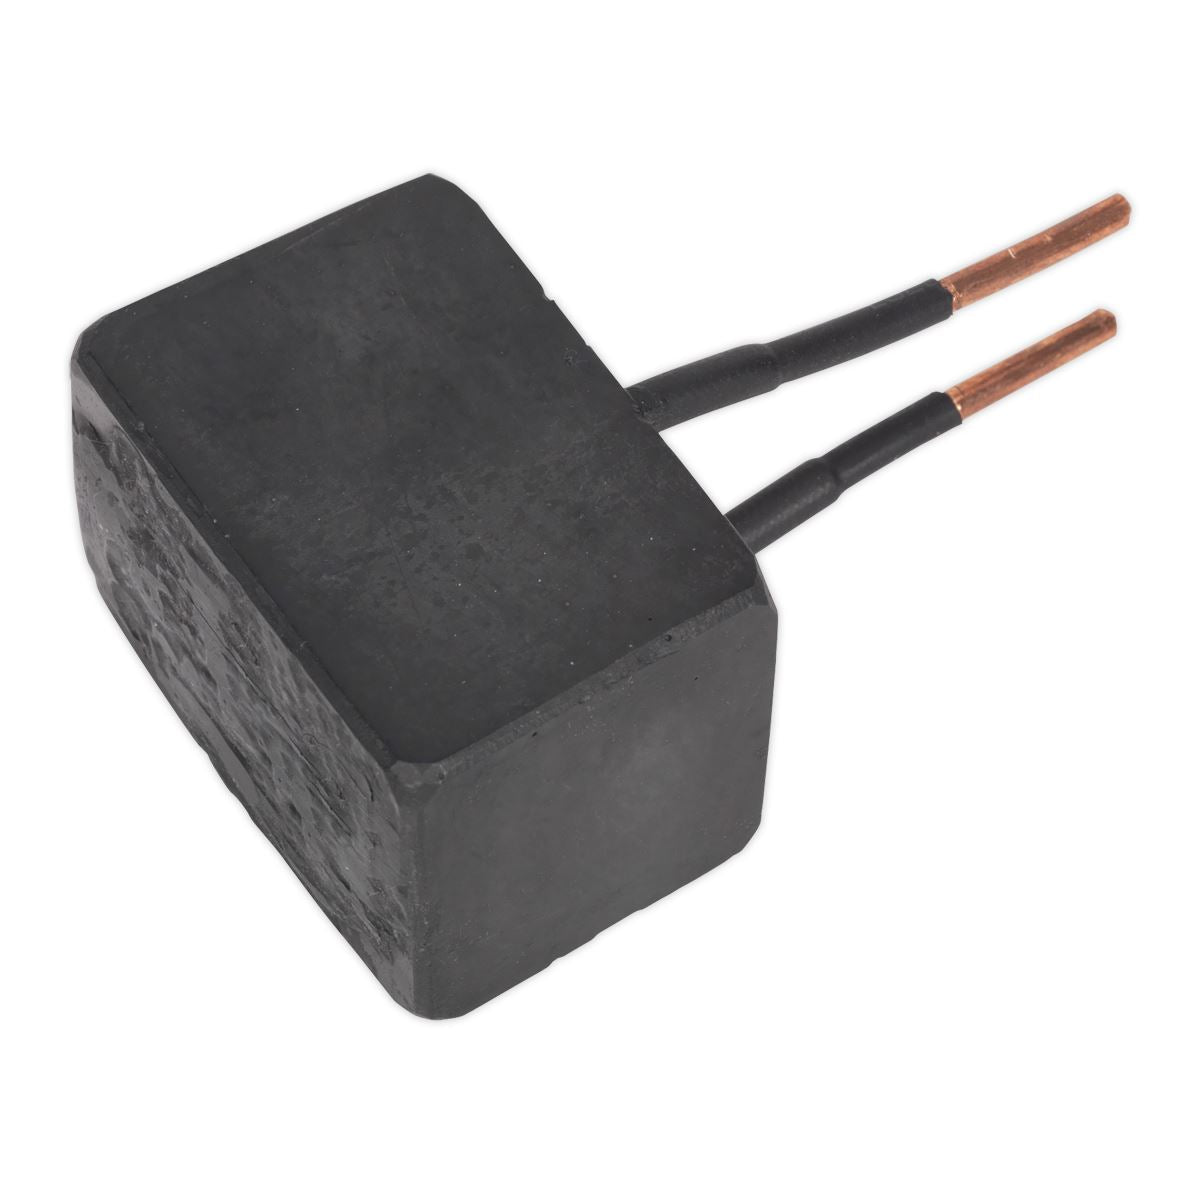 Sealey Induction Block